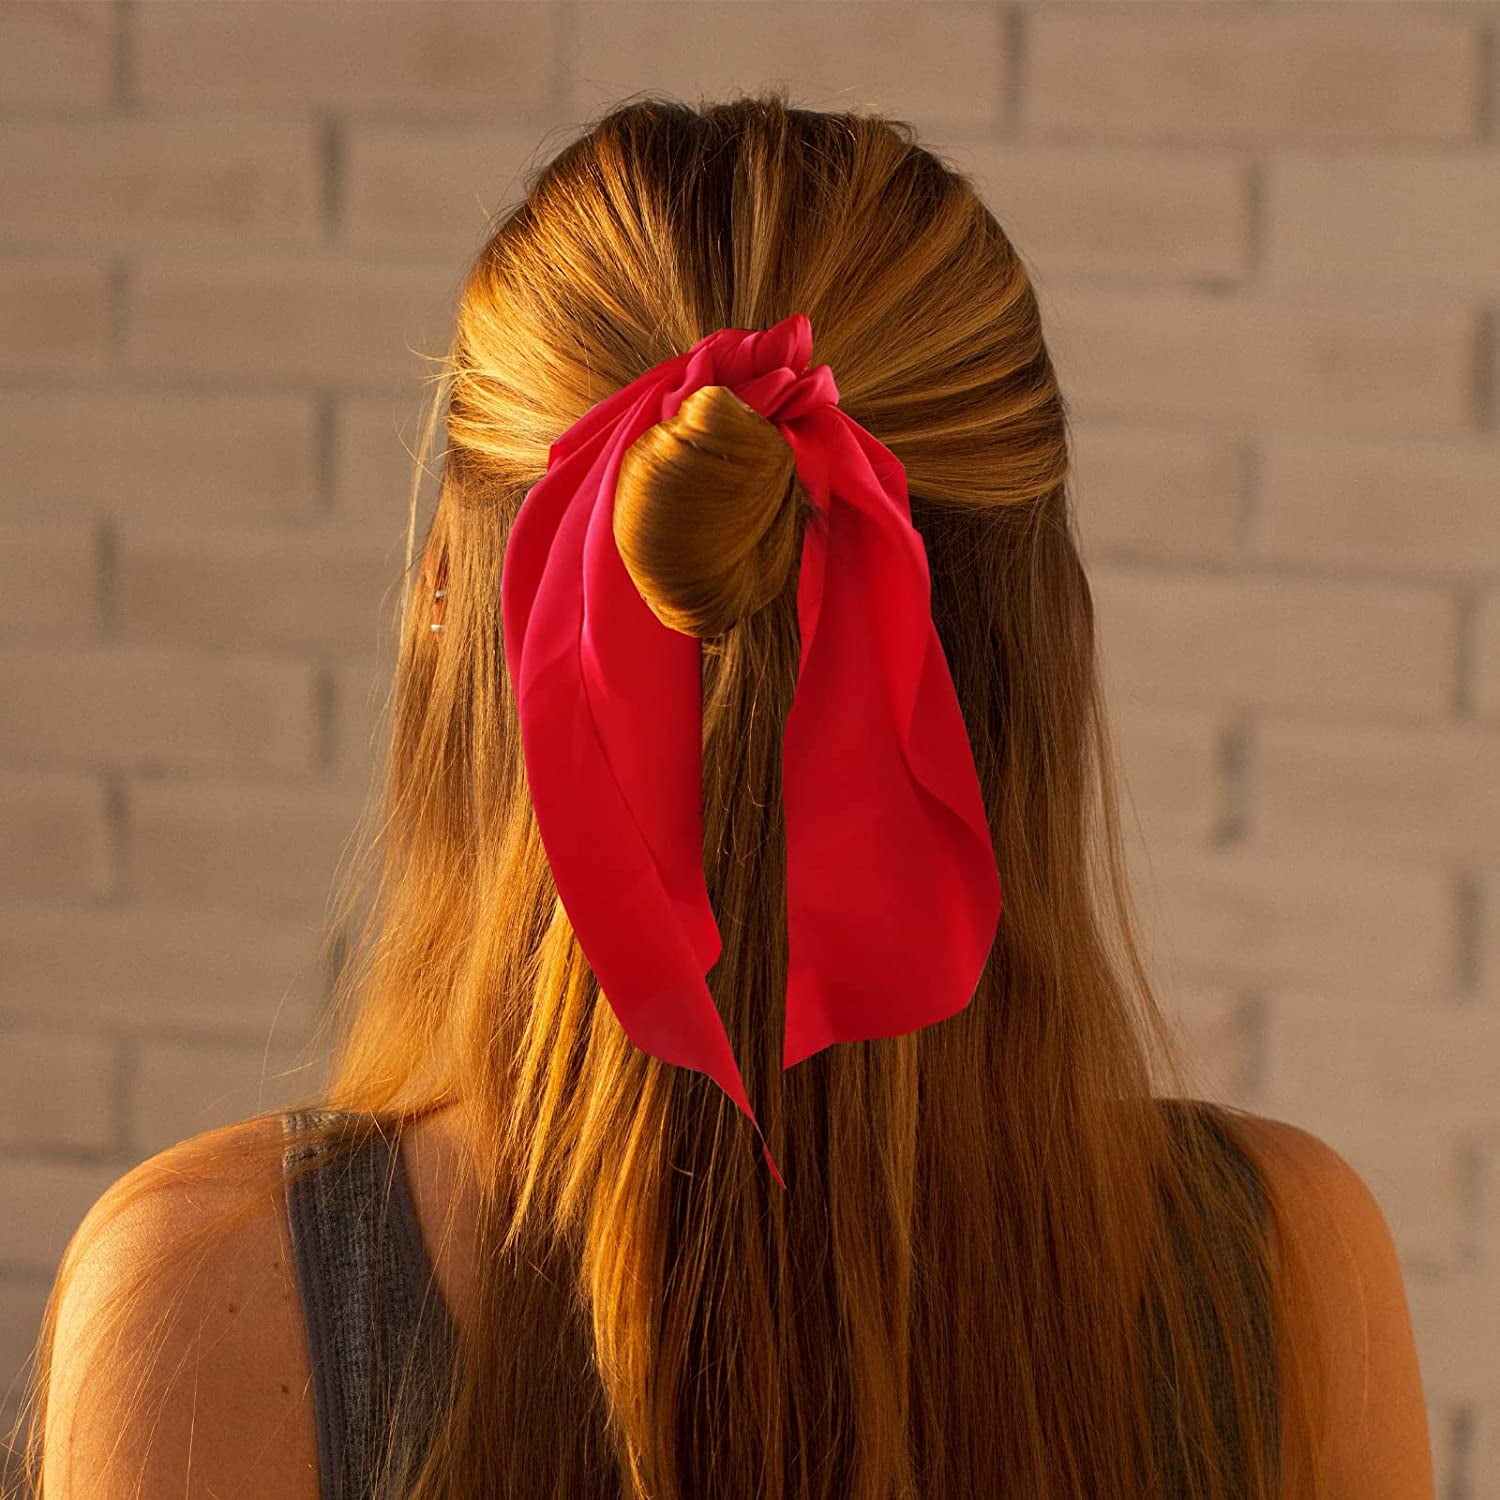 marimaricollection Red Bandana Ribbon Hair Ponies - Girls Bandana Hair Tie - Bandana - Girls Cute Hair Accessory - Red Ribbon for Hair - Country Girl Hair Pony